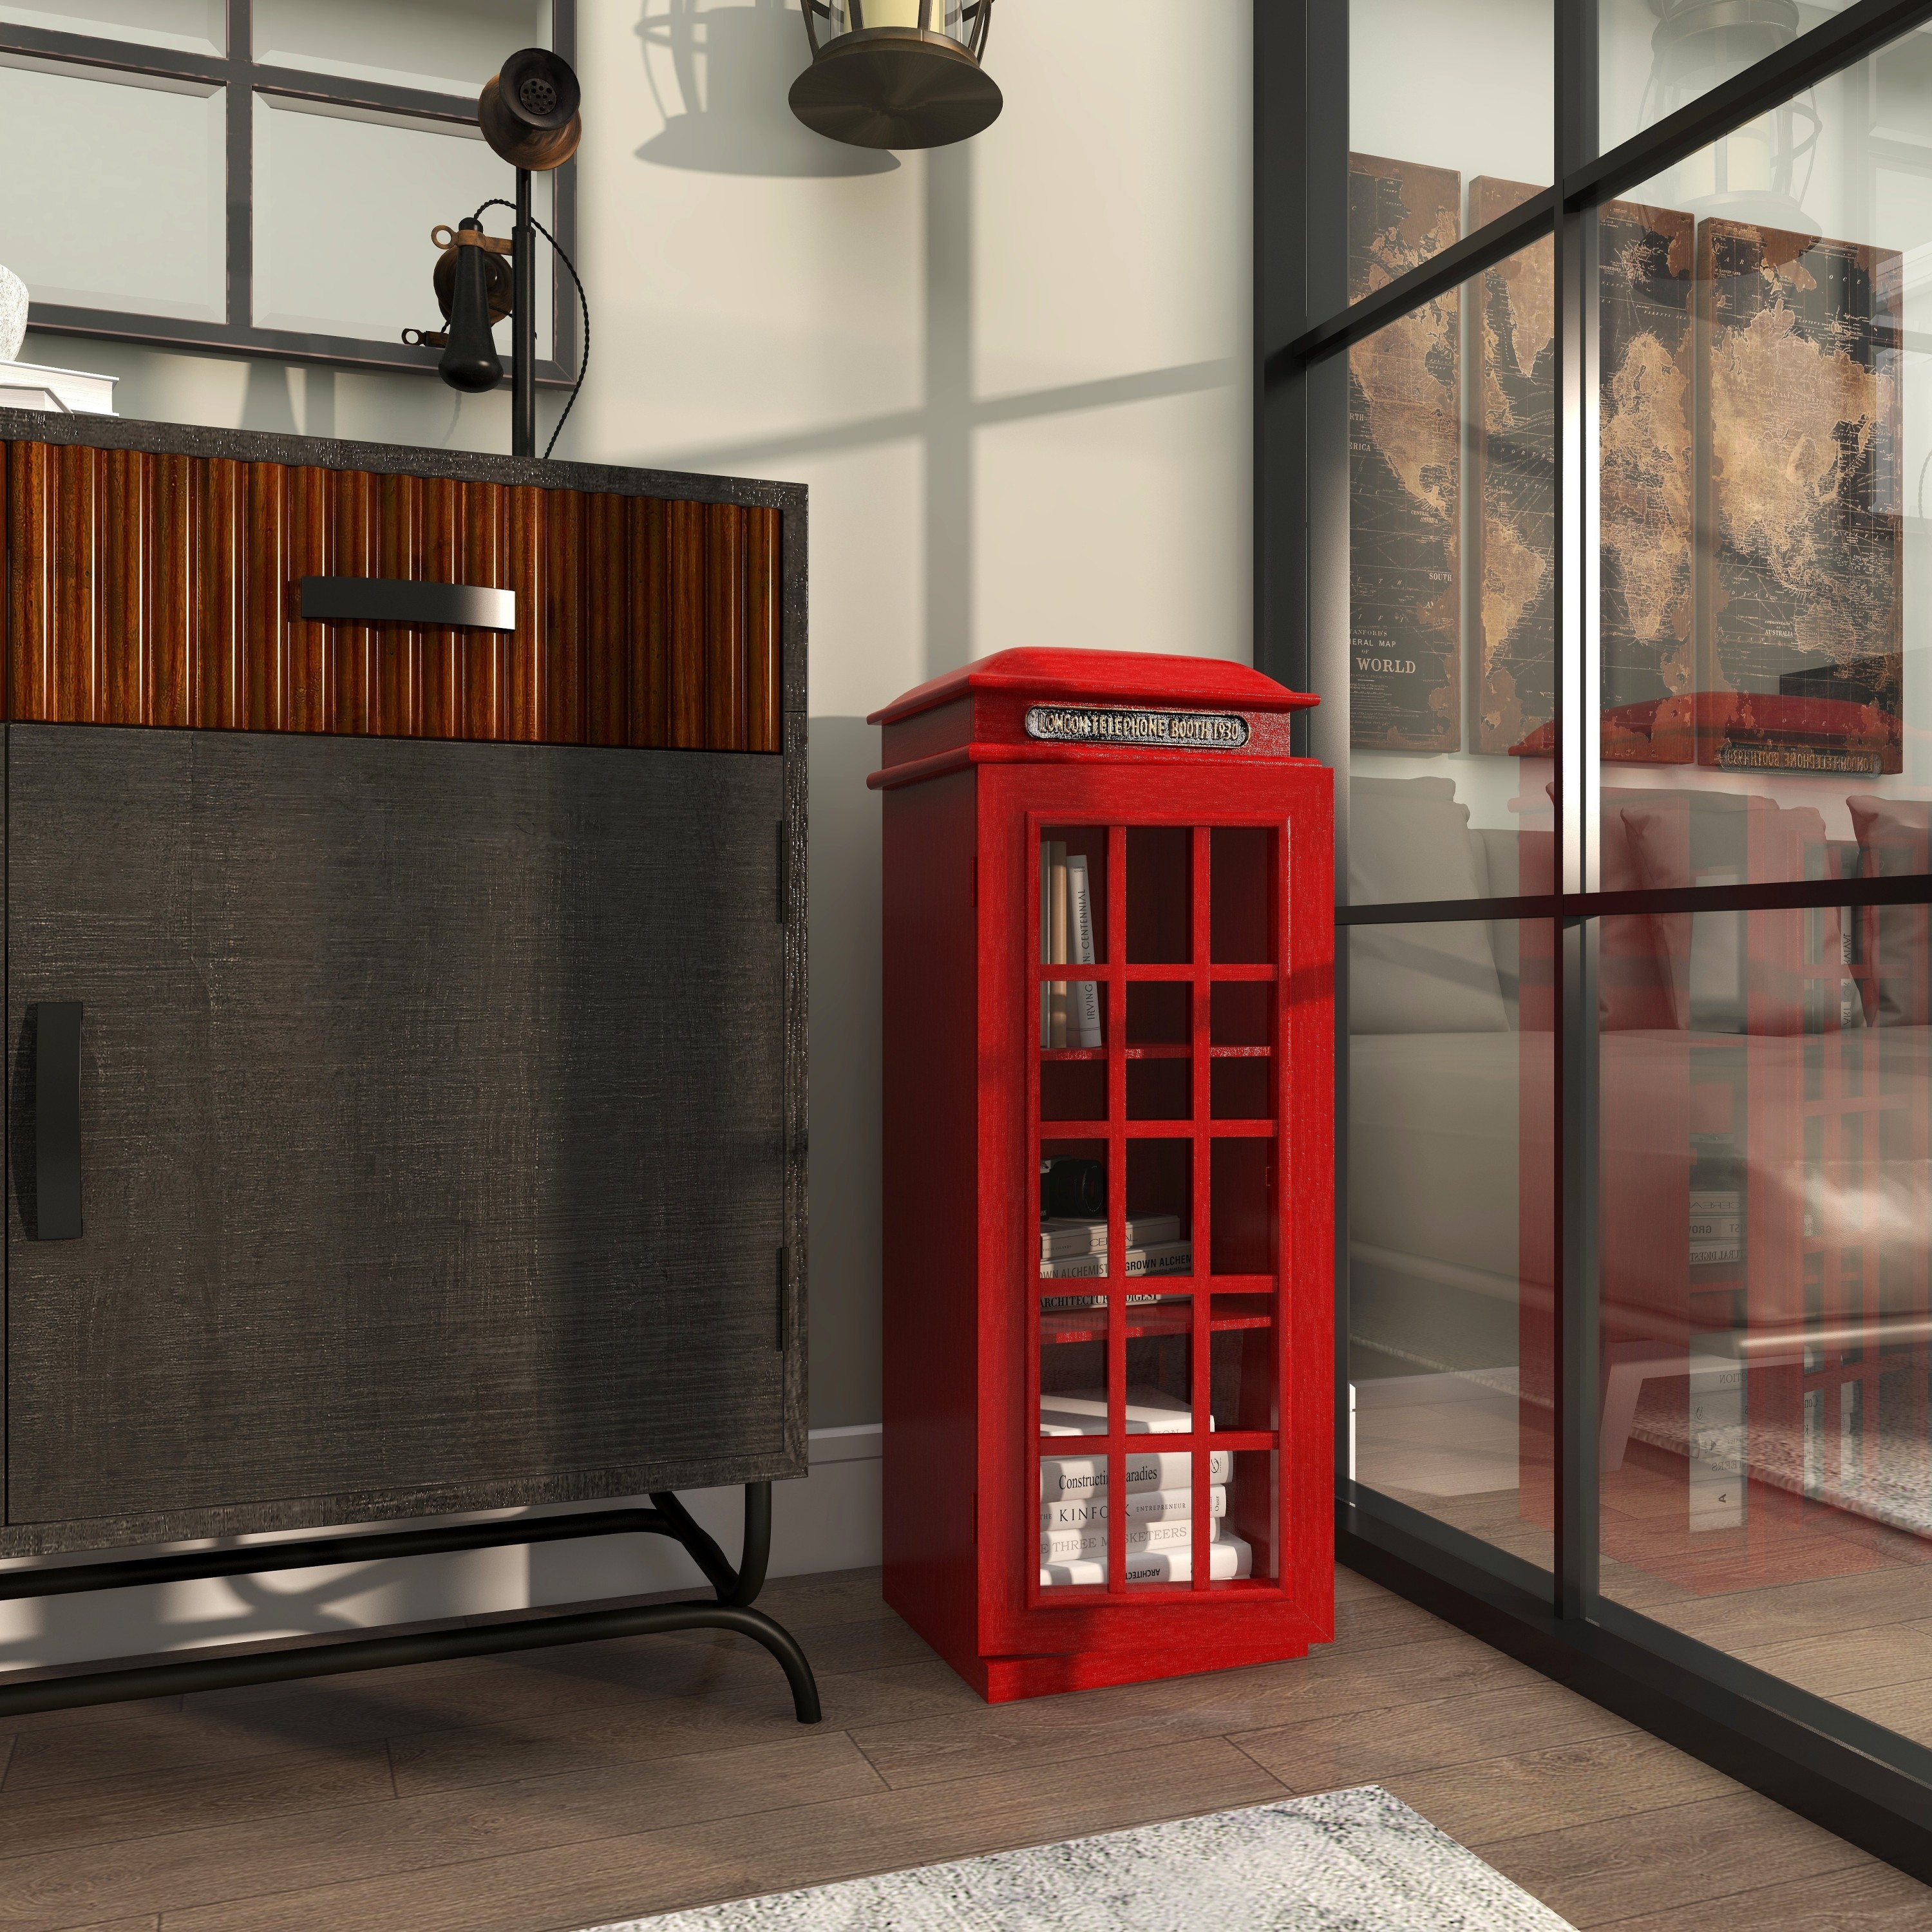 DecMode 11" x 30" Red Wooden London Telephone Booth 2 Shelf Storage Unit, 1-Piece - image 5 of 18